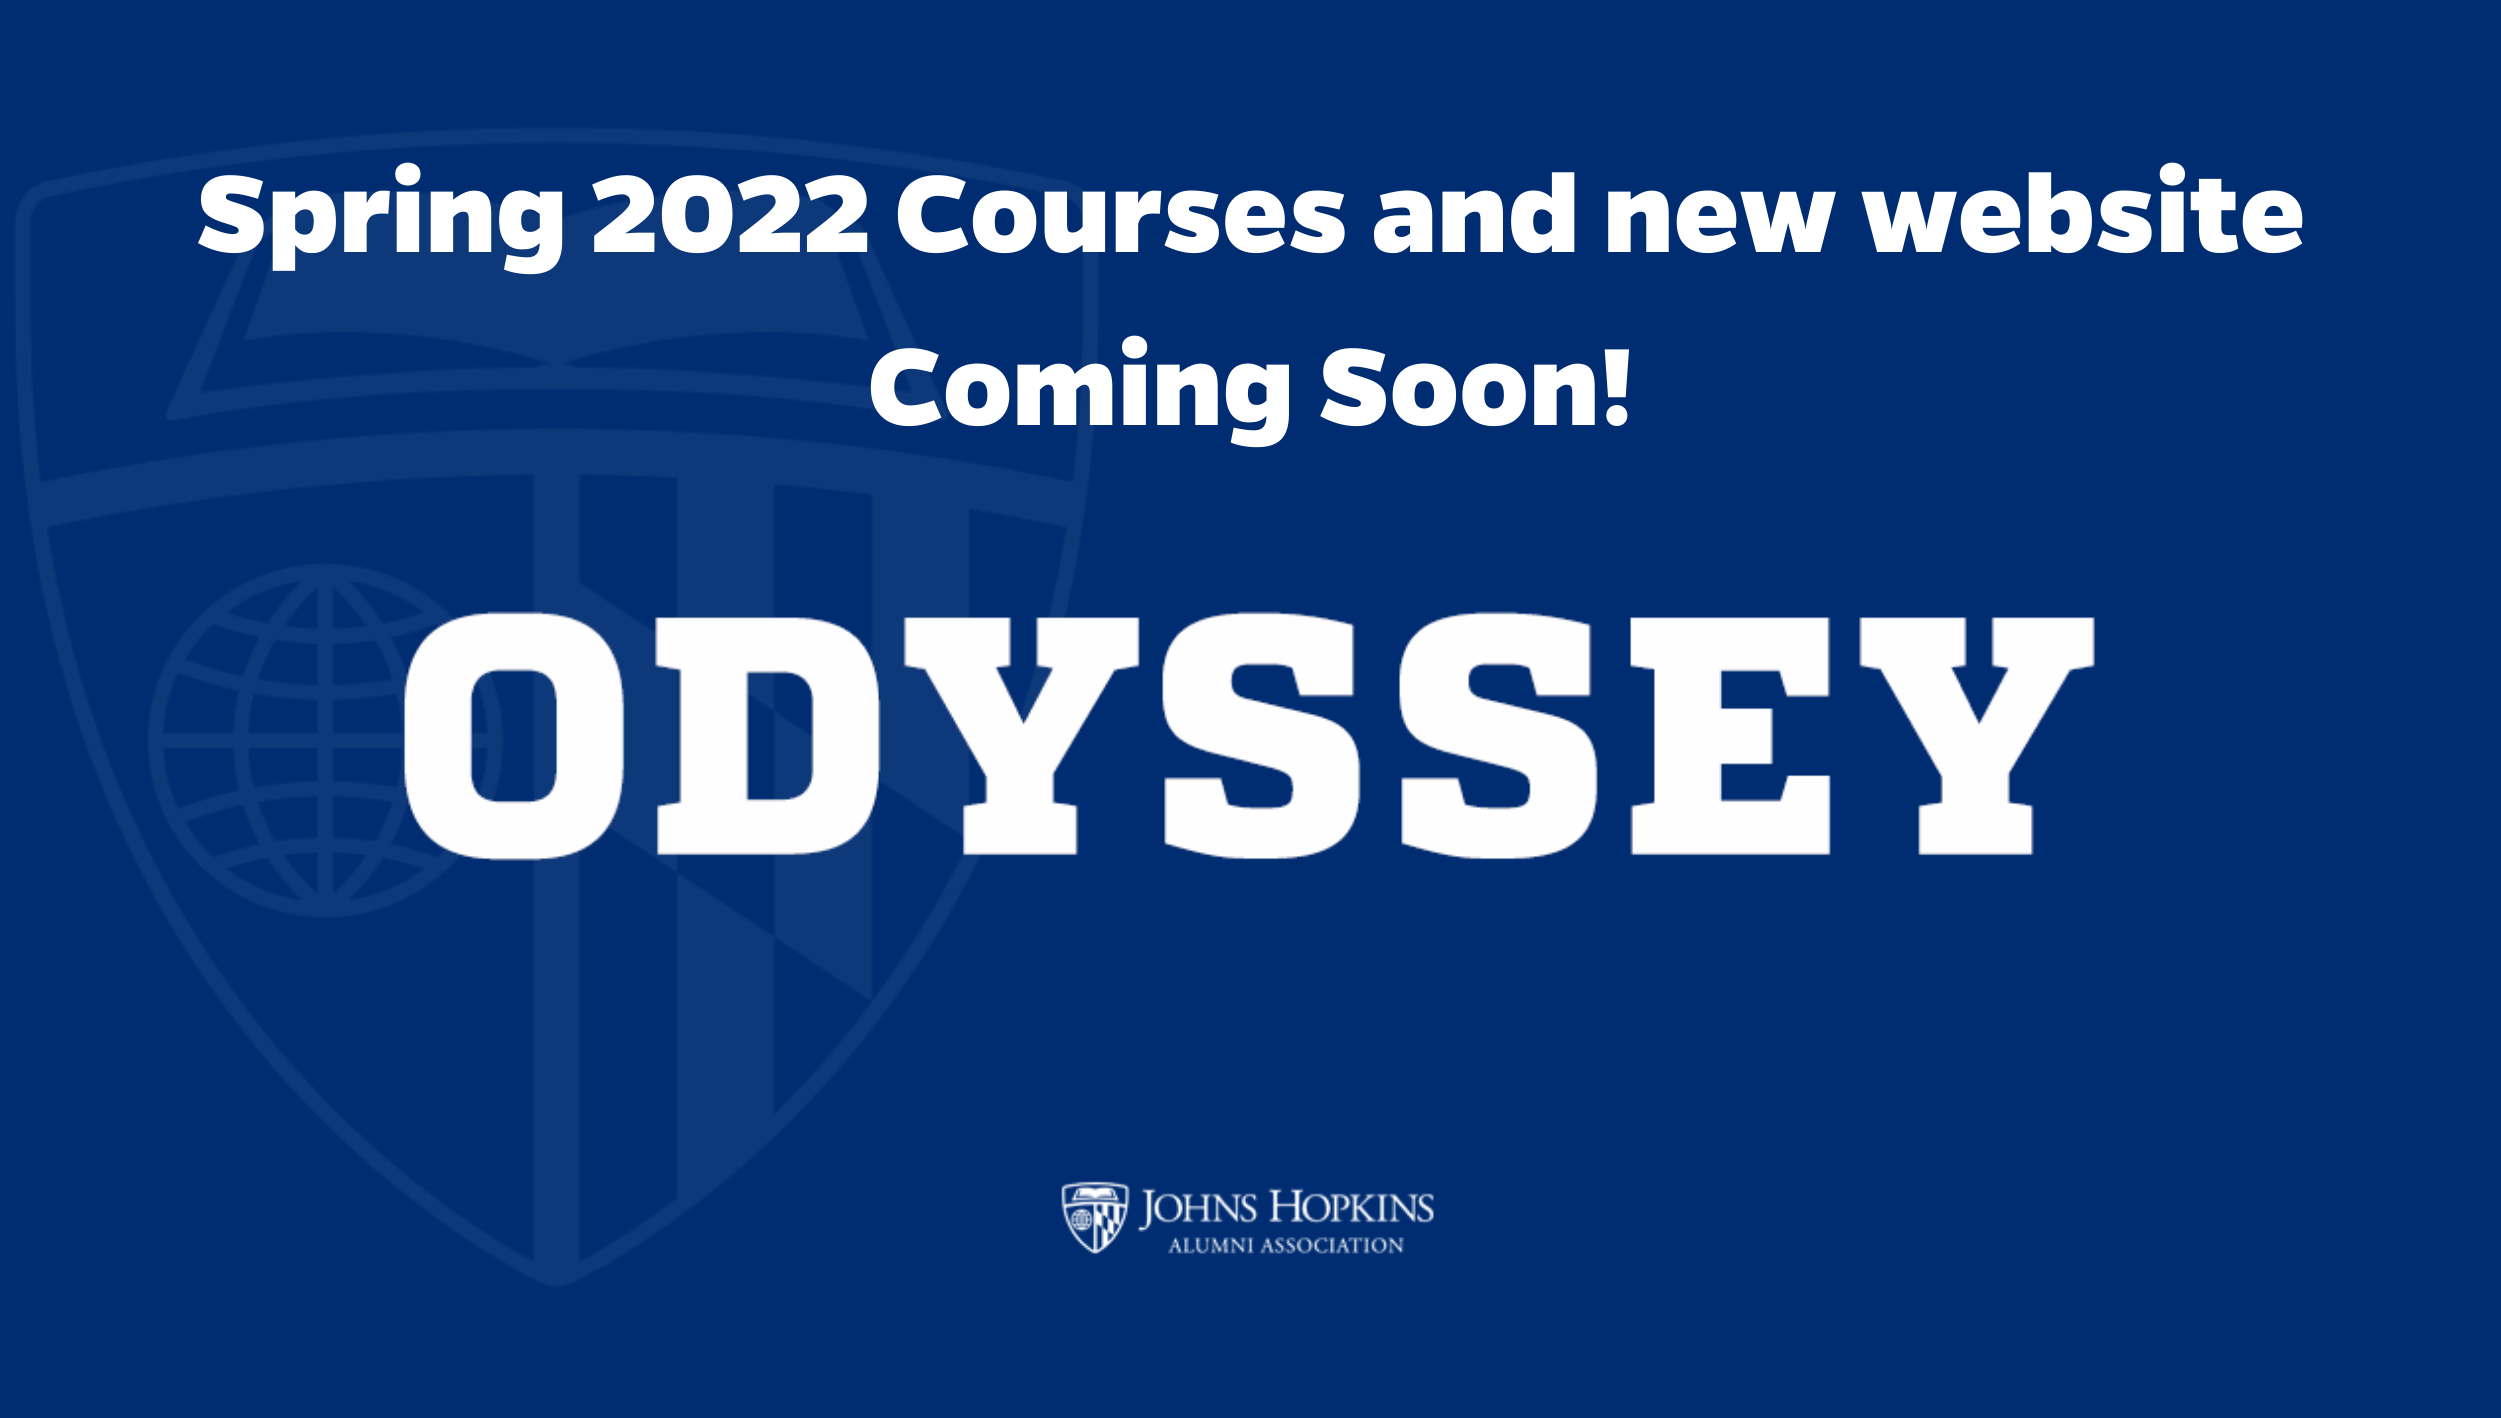 Odyssey Spring 2022 courses coming soon